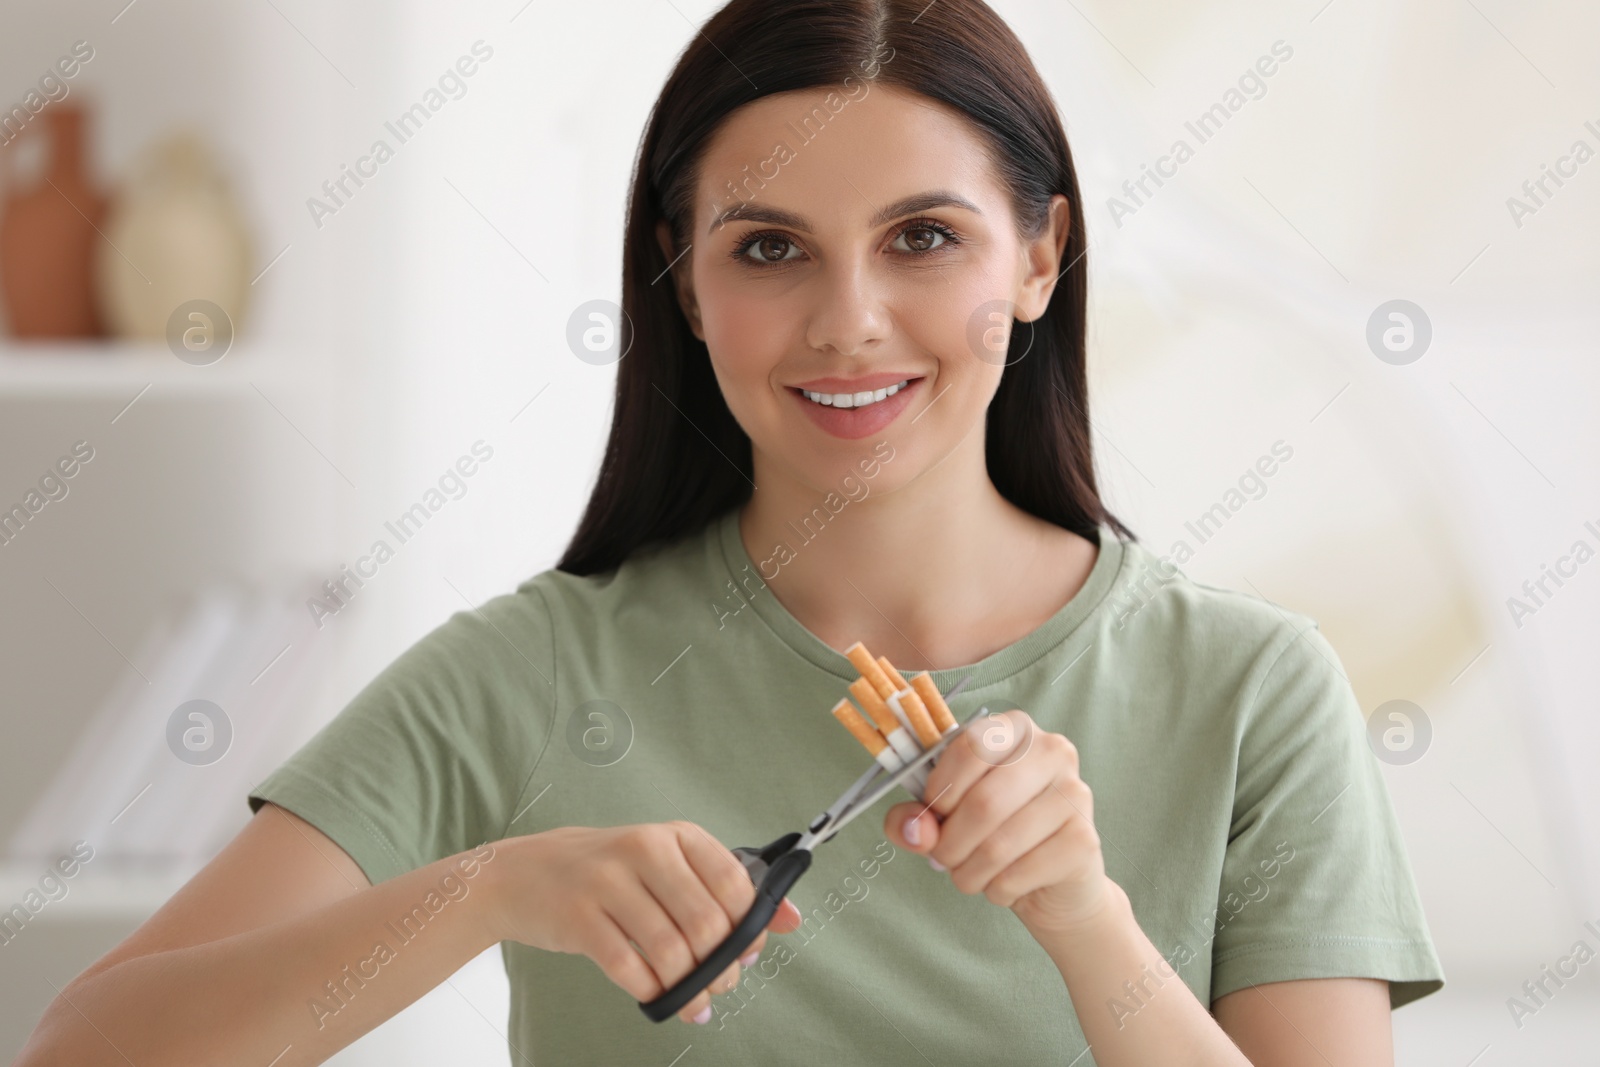 Photo of Stop smoking concept. Young woman cutting cigarettes on blurred background